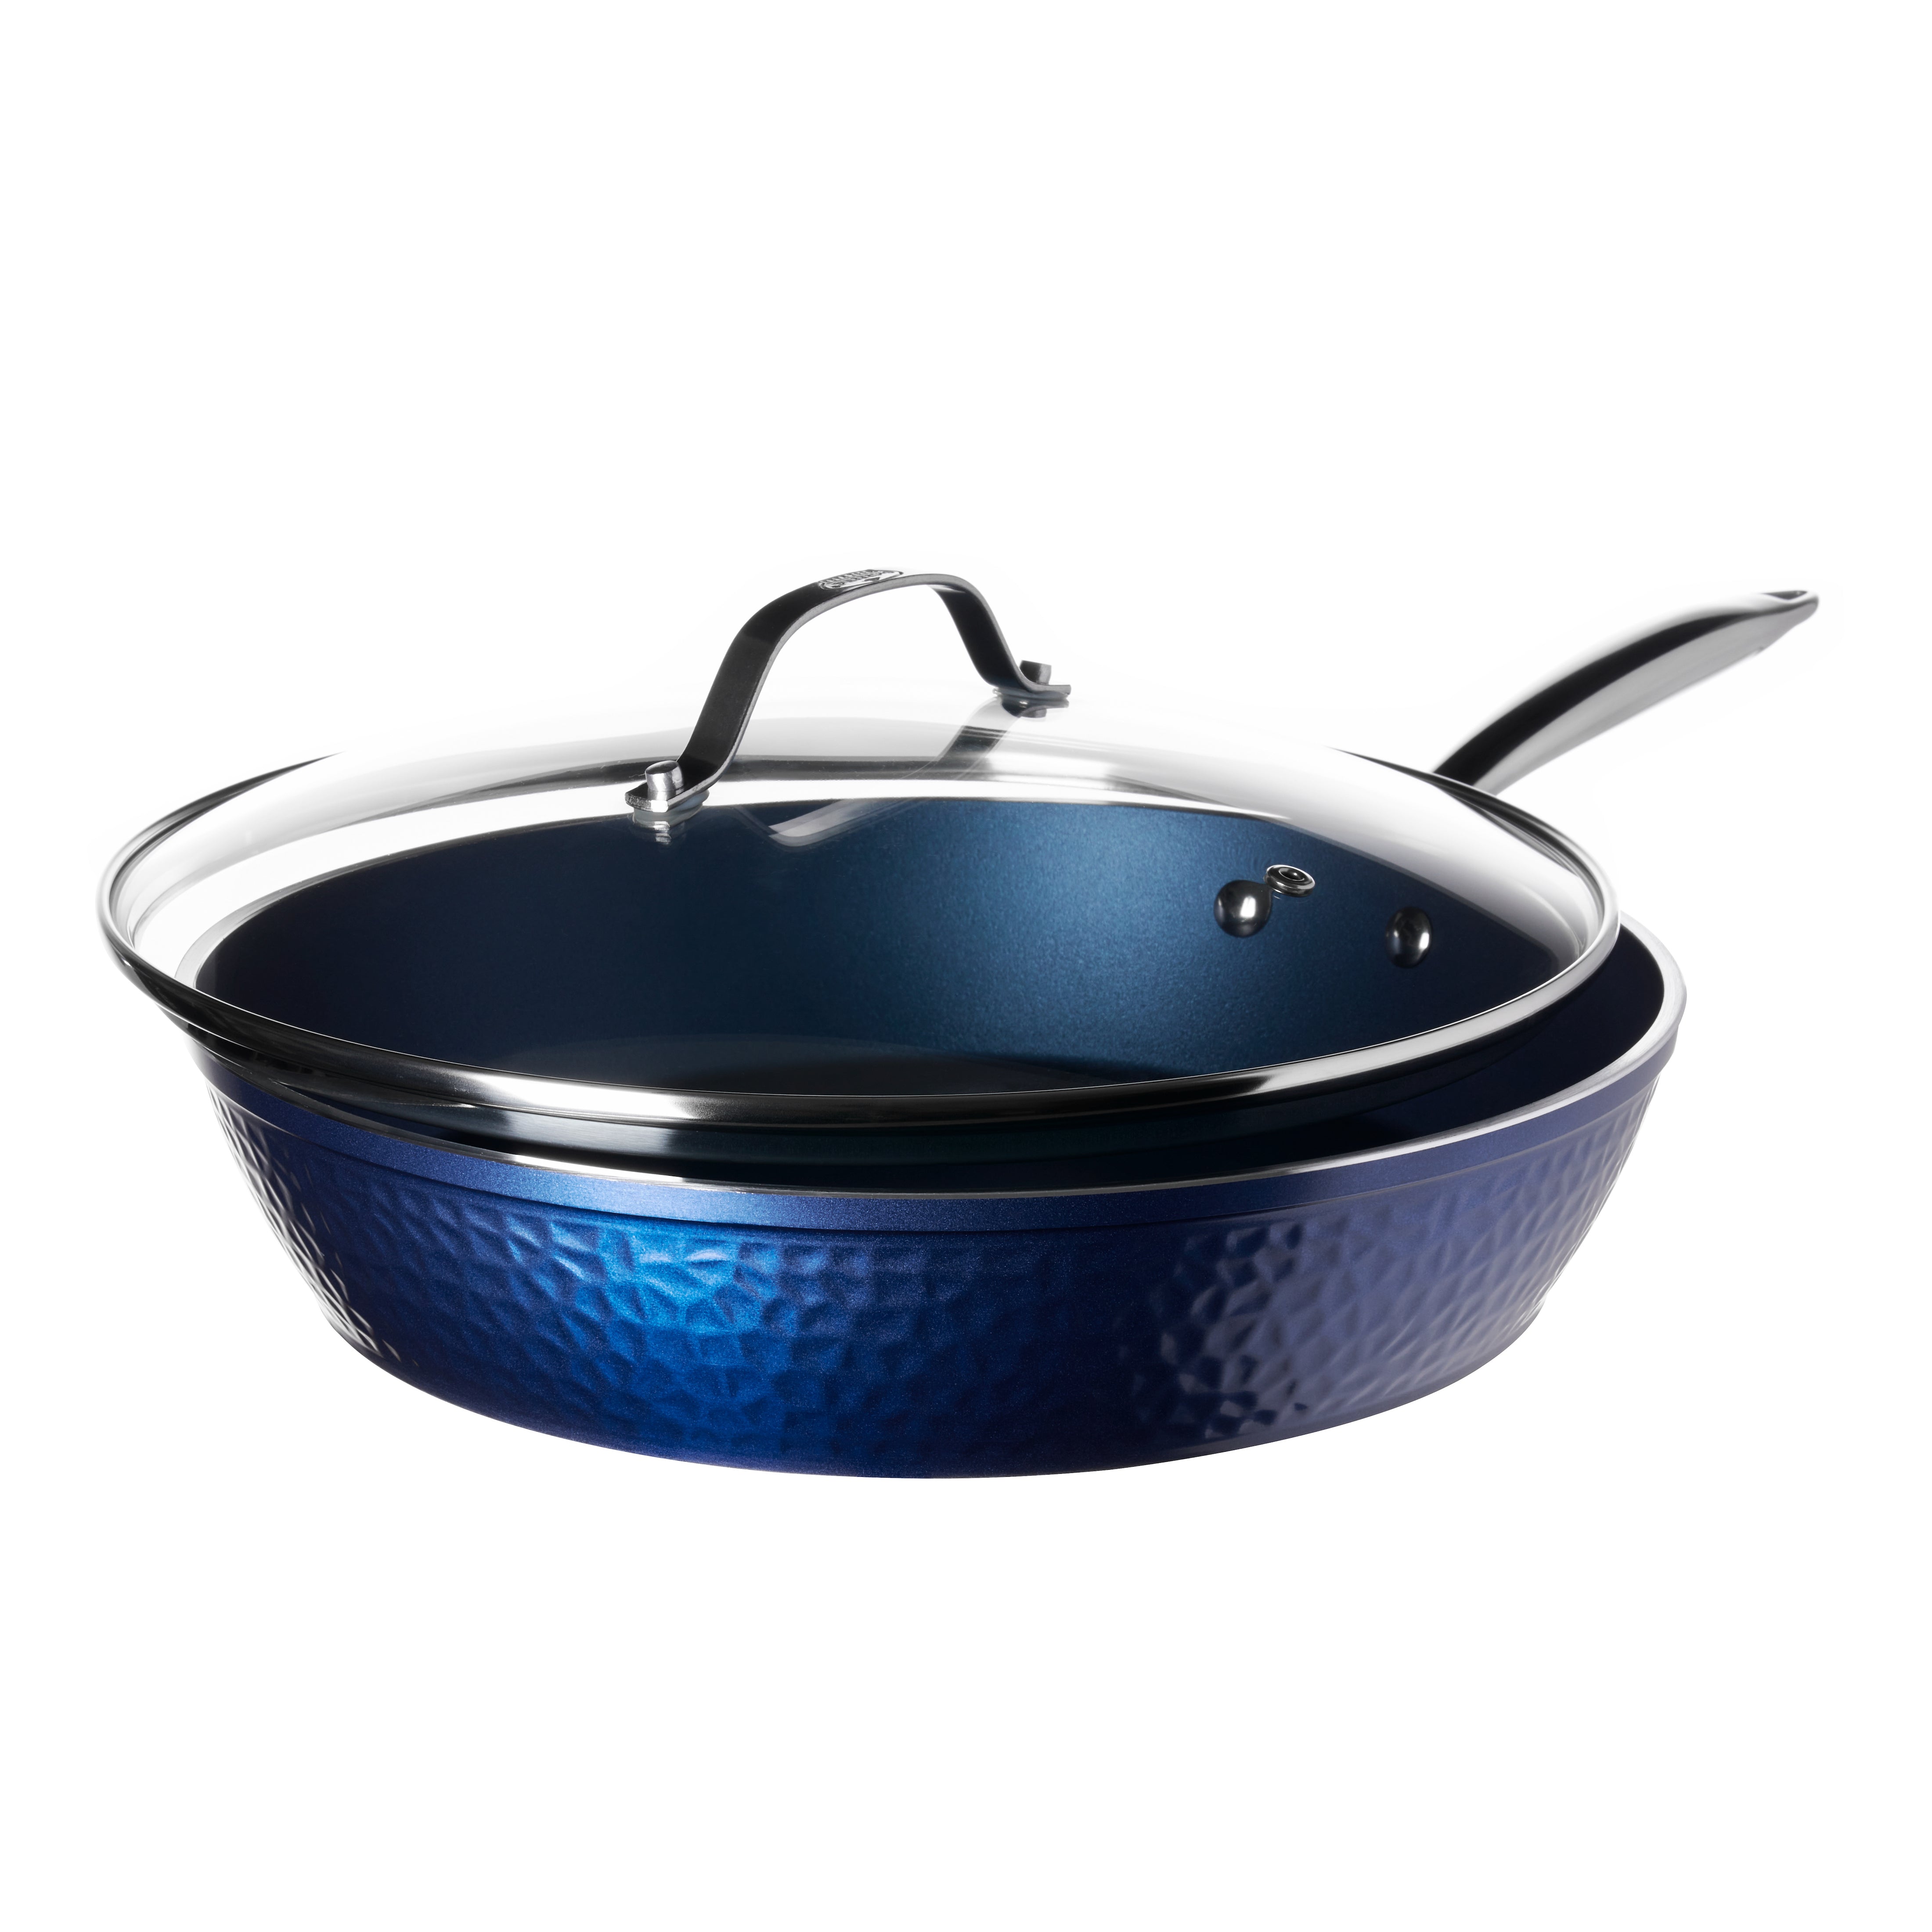 1 Blue Sapphire Ceramic Coated Non Stick Frying Pan 8'' Frypan Eco